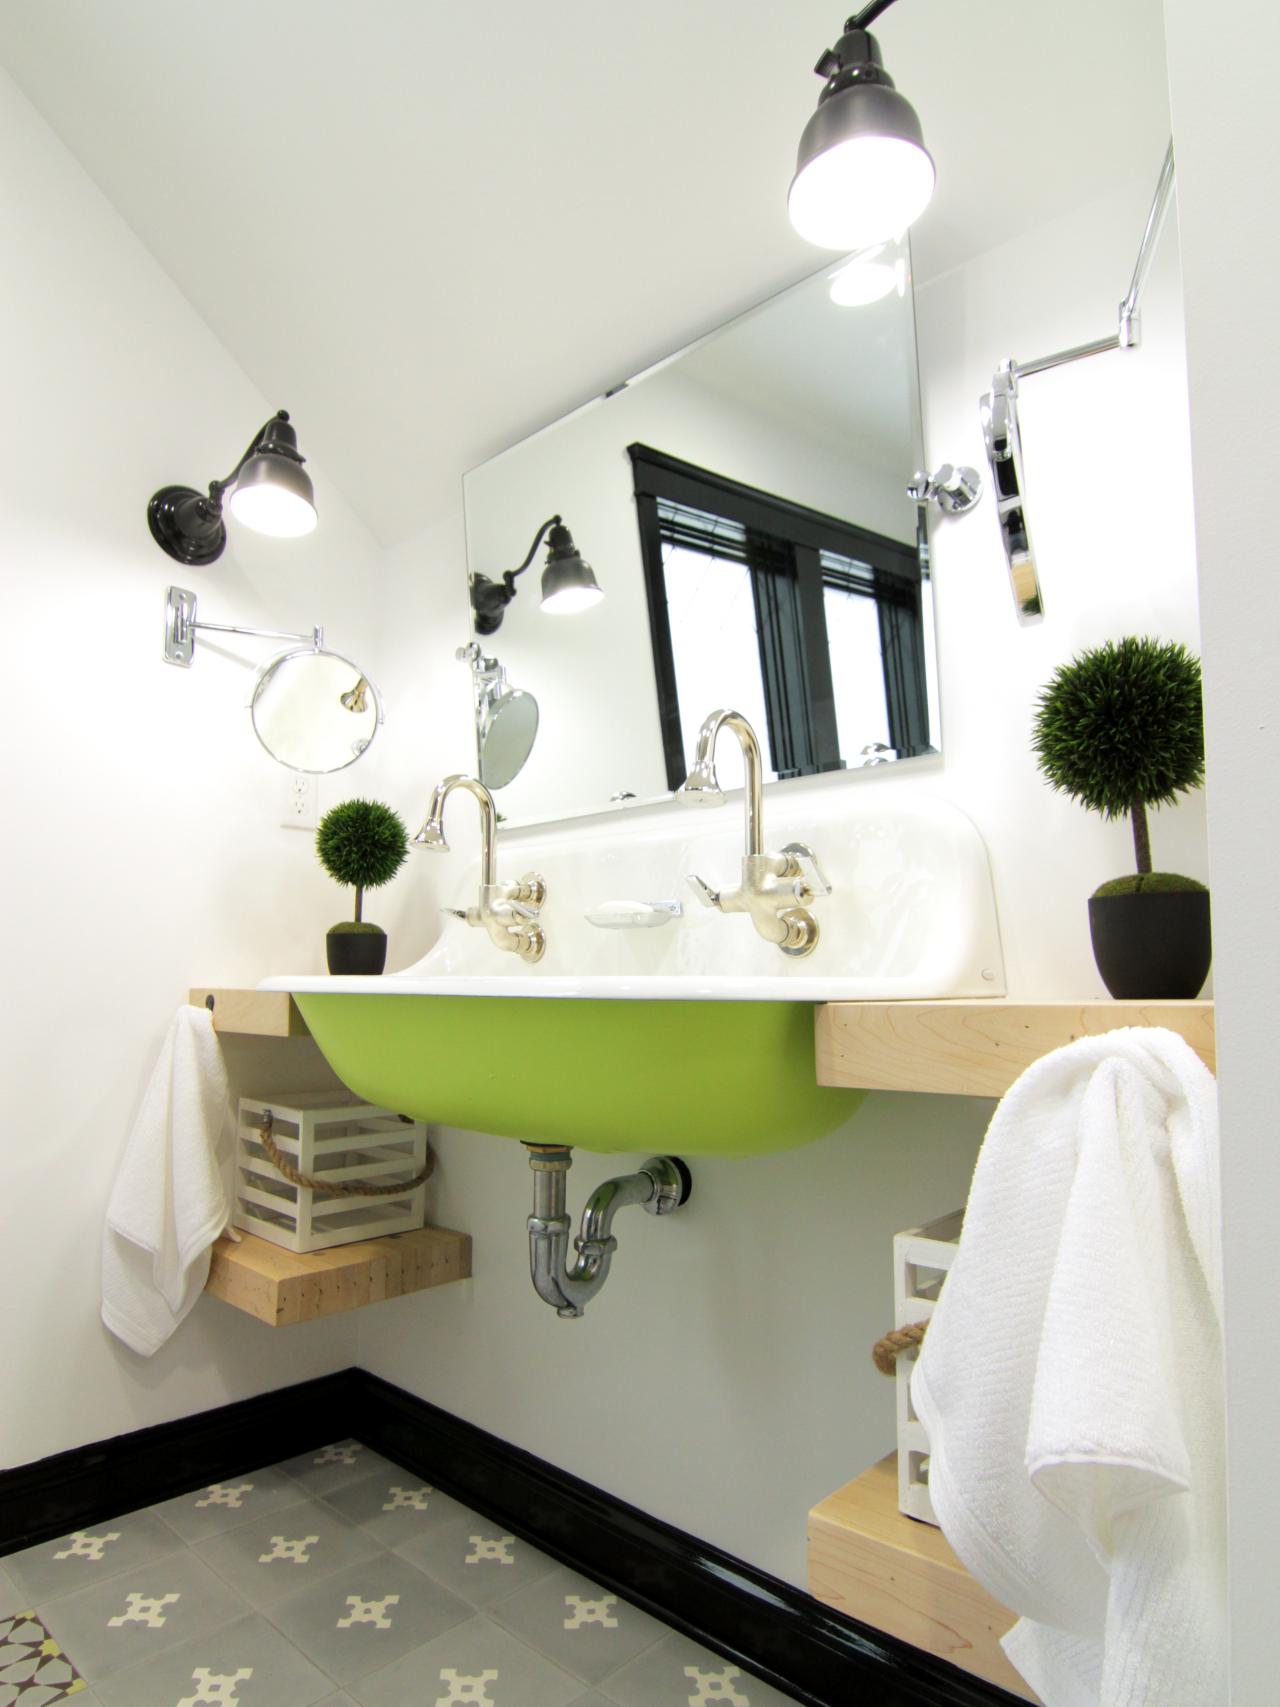 Eclectic Bathroom Design Ideas Pictures Tips From Hgtv Hgtv